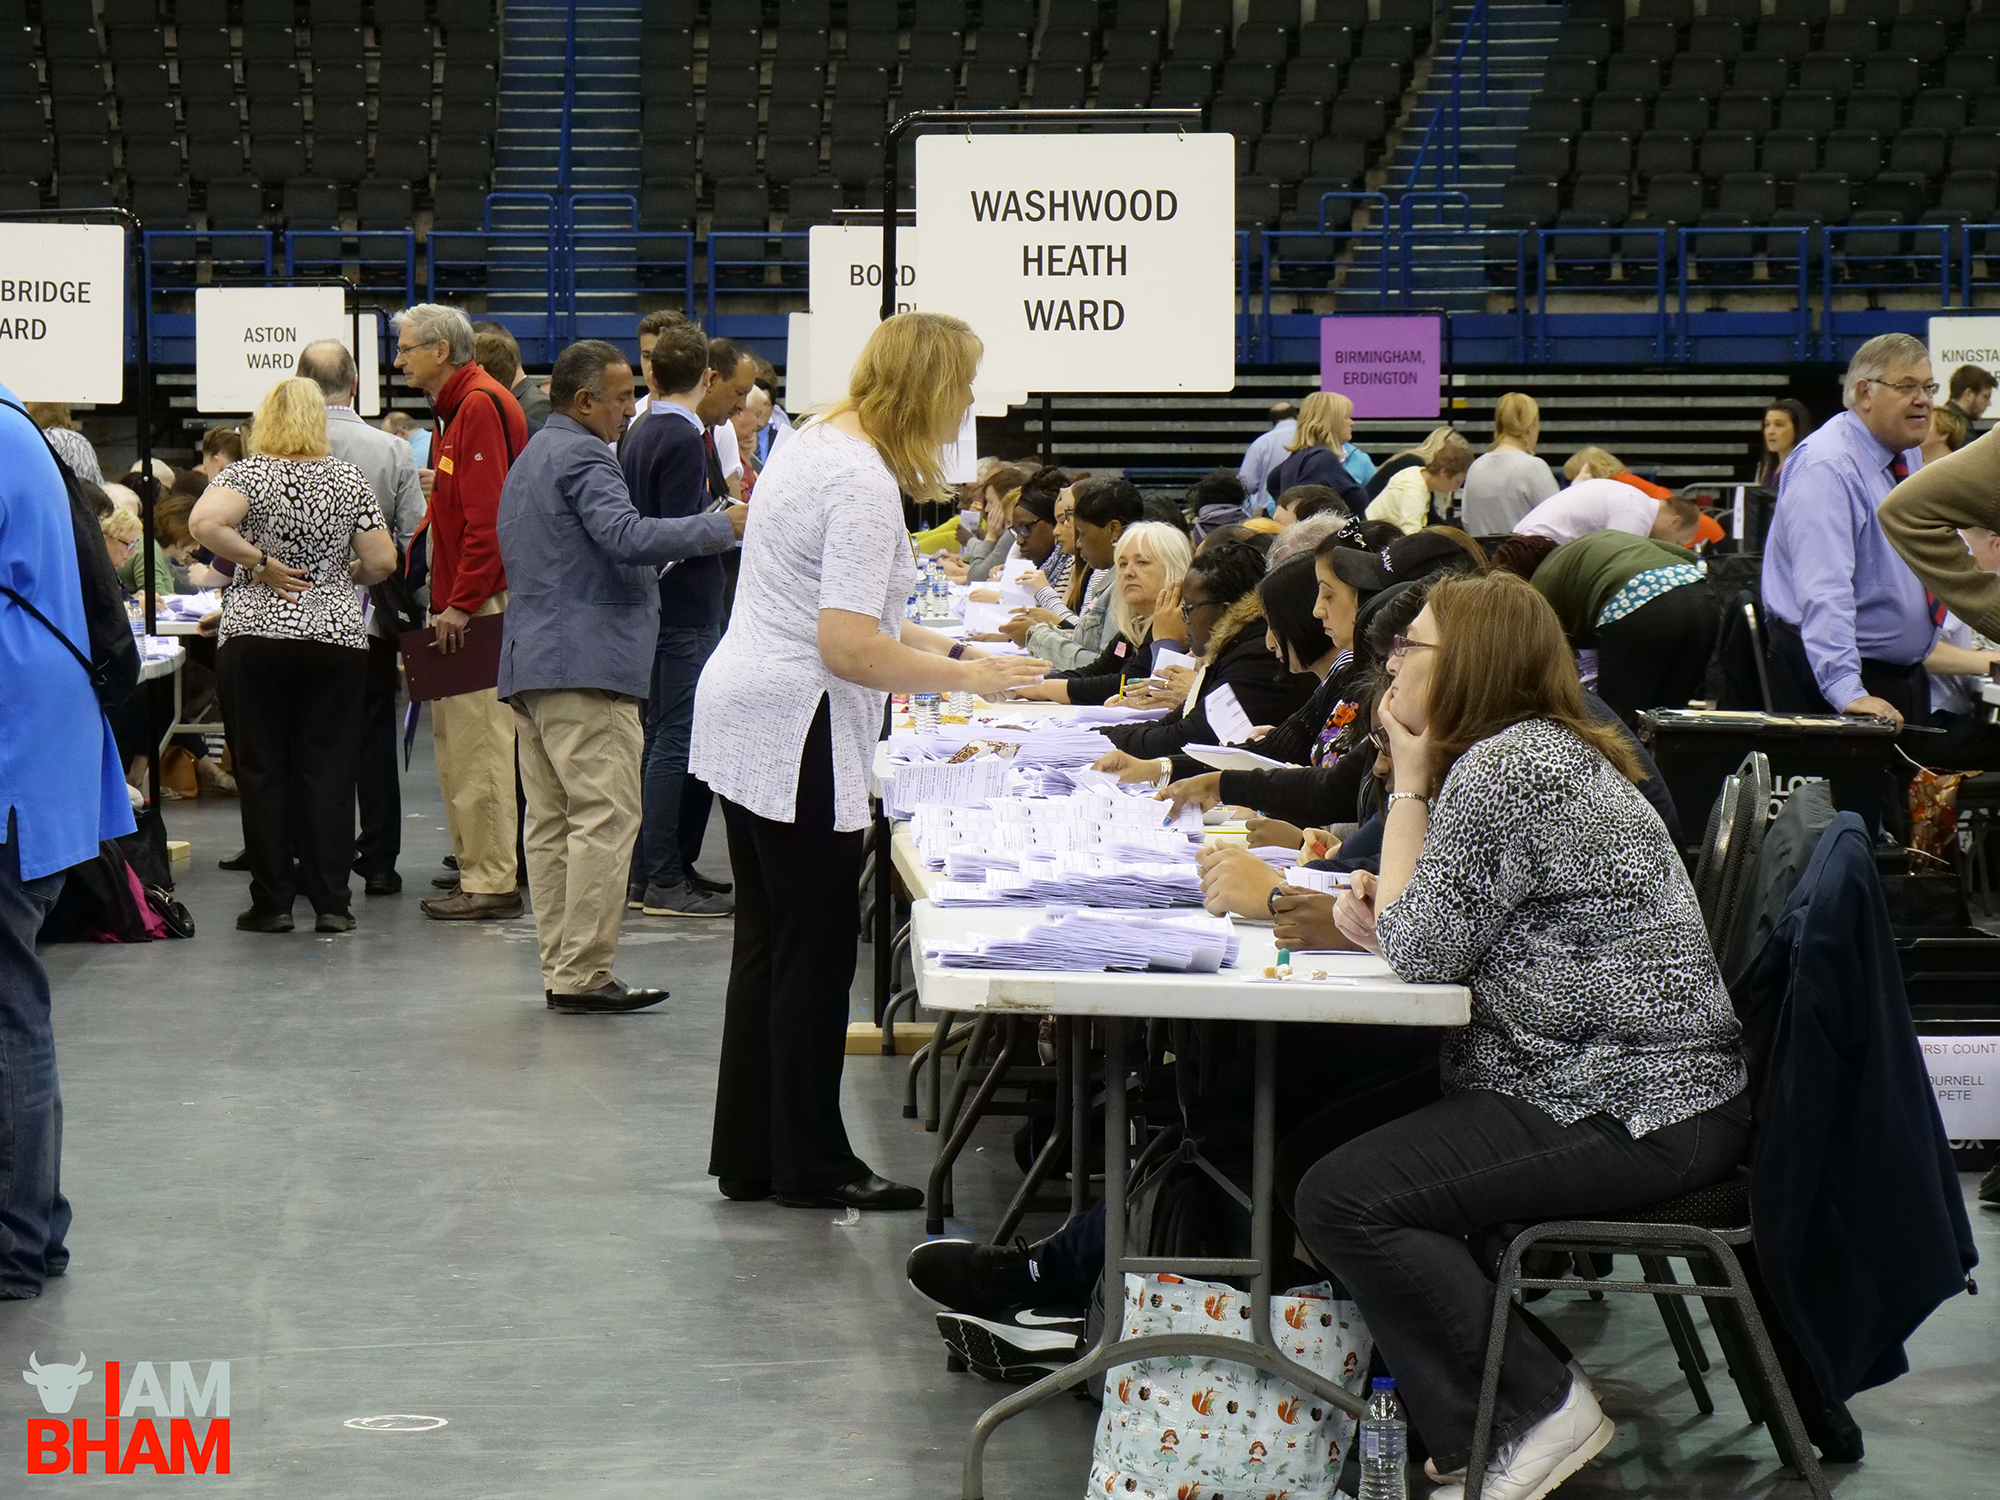 The official West Midlands Mayoral Election vote count at the Birmingham Barclaycard Arena